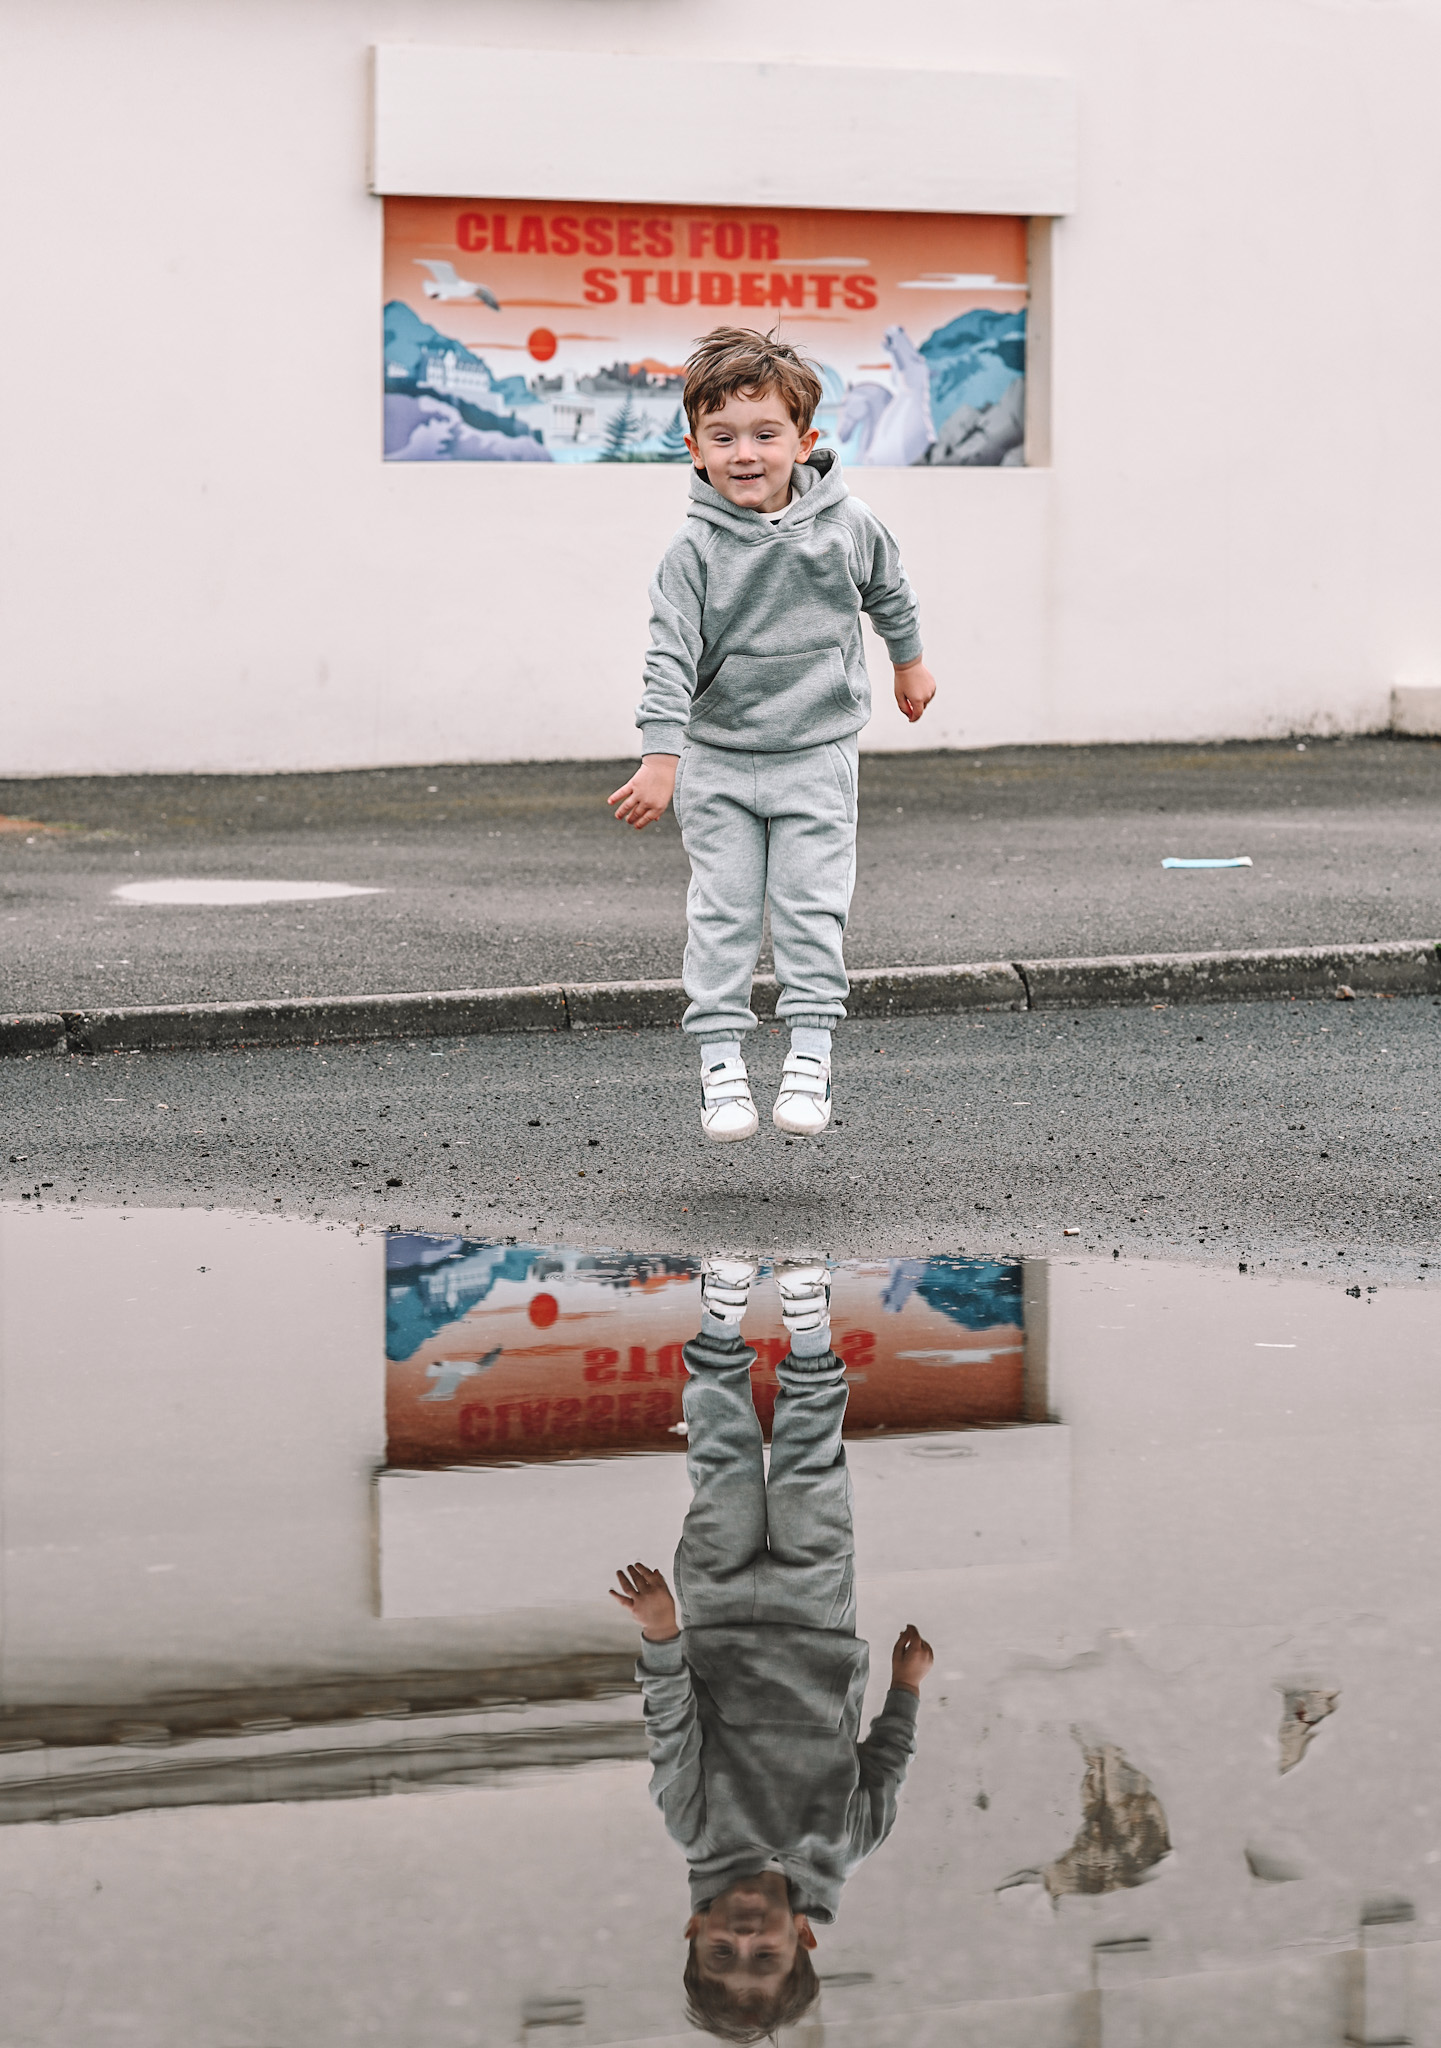 Max puddle jumping on a rainy day